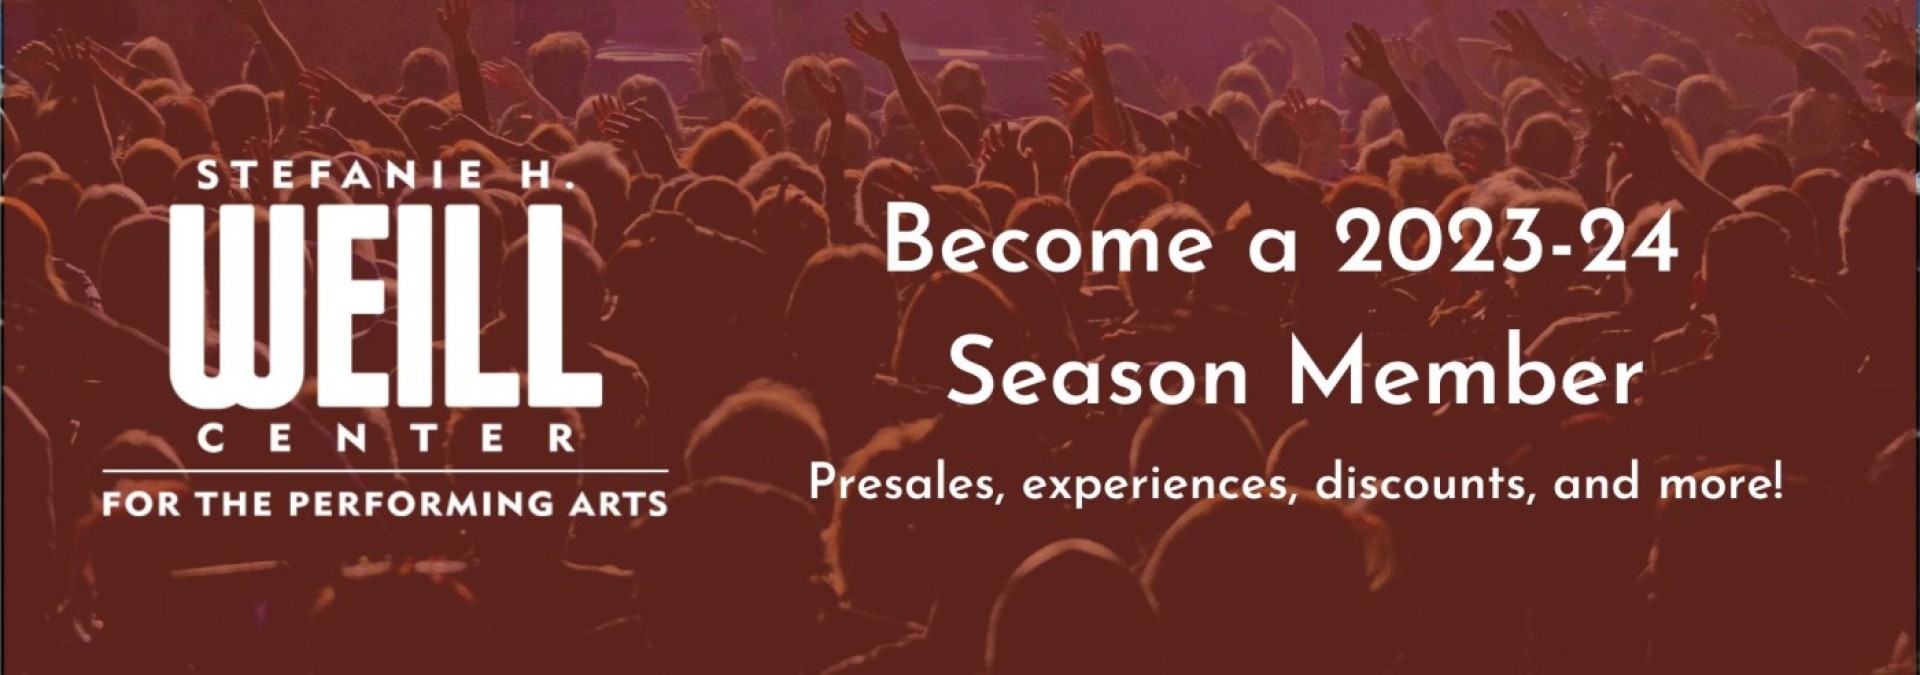 Presales experiences discounts and more